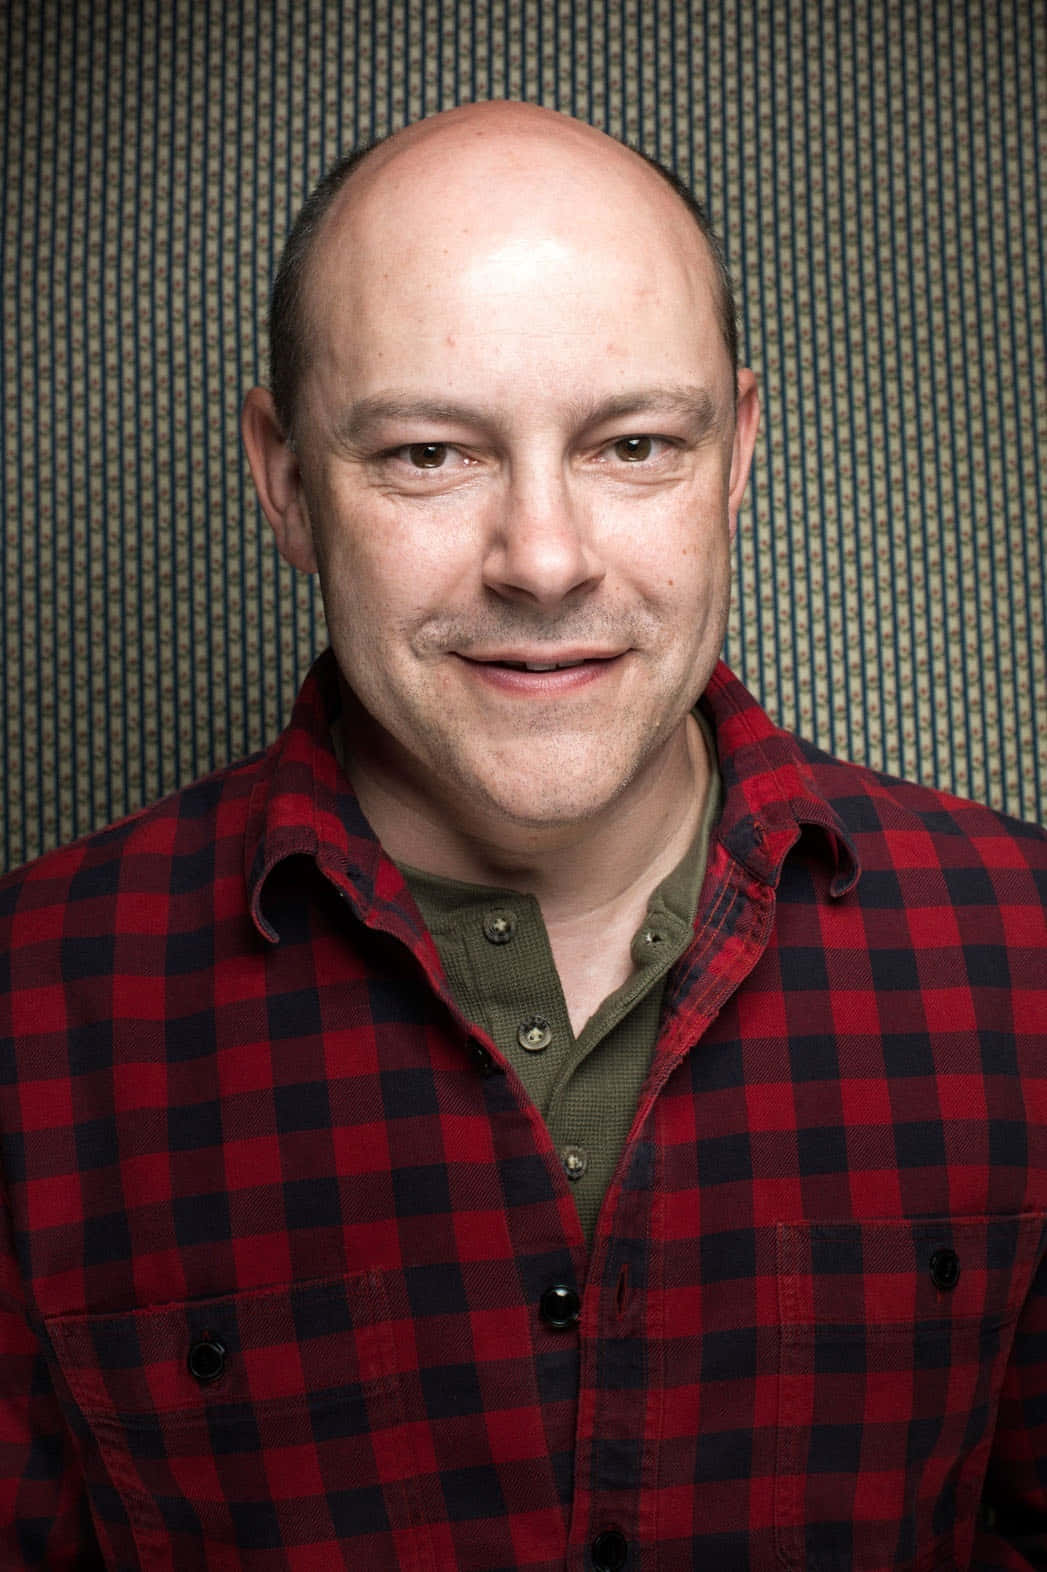 Rob Corddry in Midtown Manhattan, NYC Wallpaper